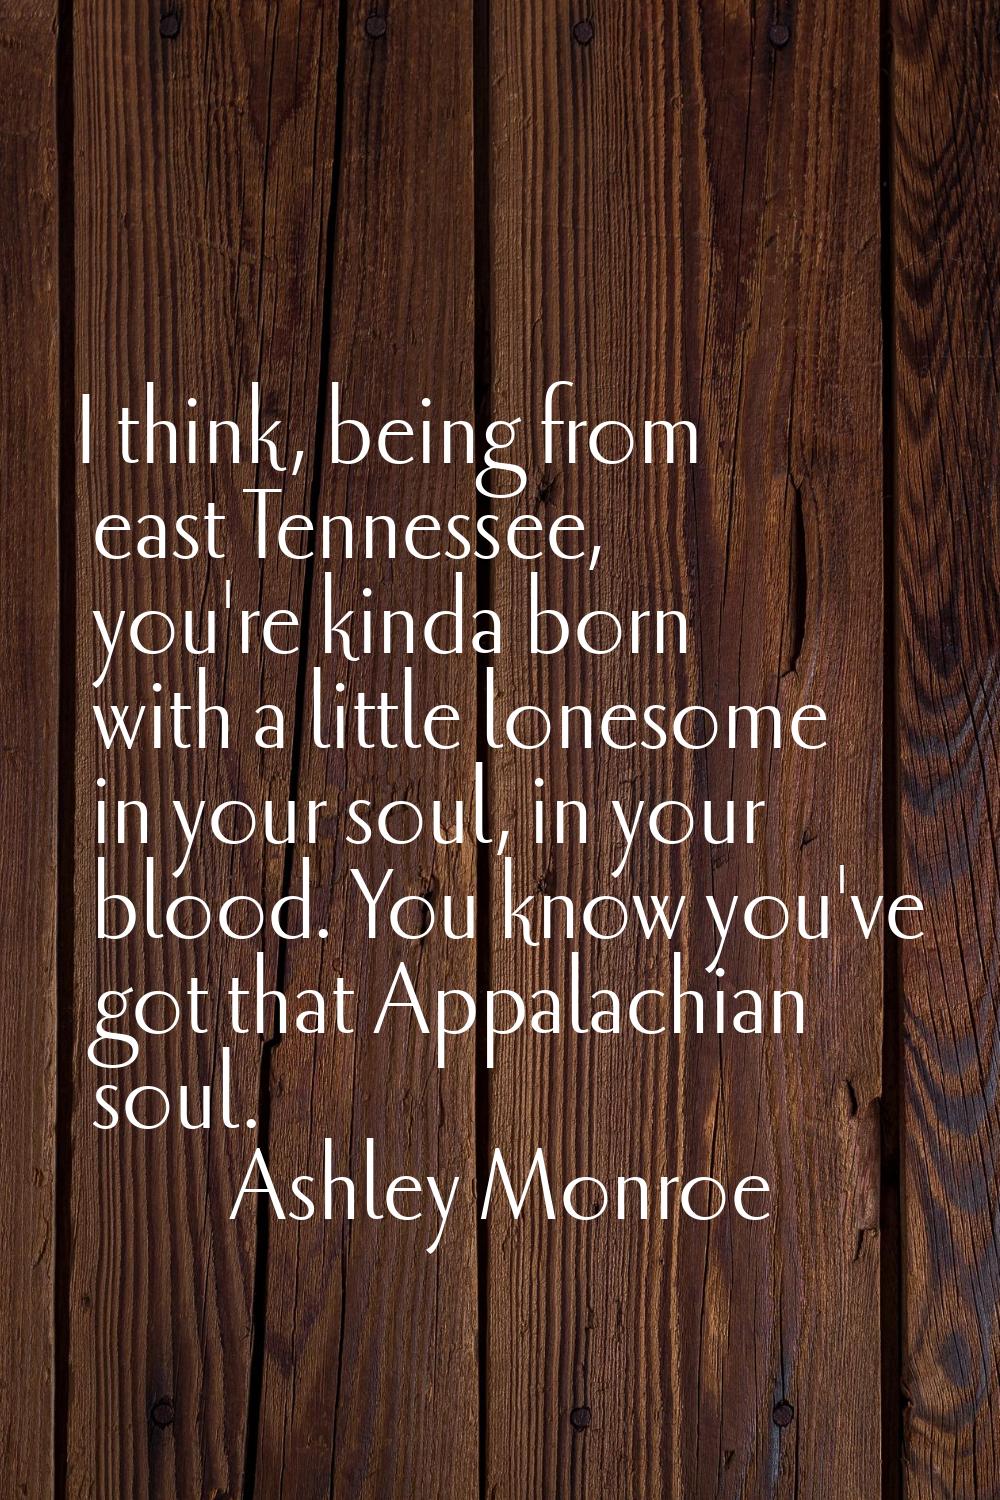 I think, being from east Tennessee, you're kinda born with a little lonesome in your soul, in your 